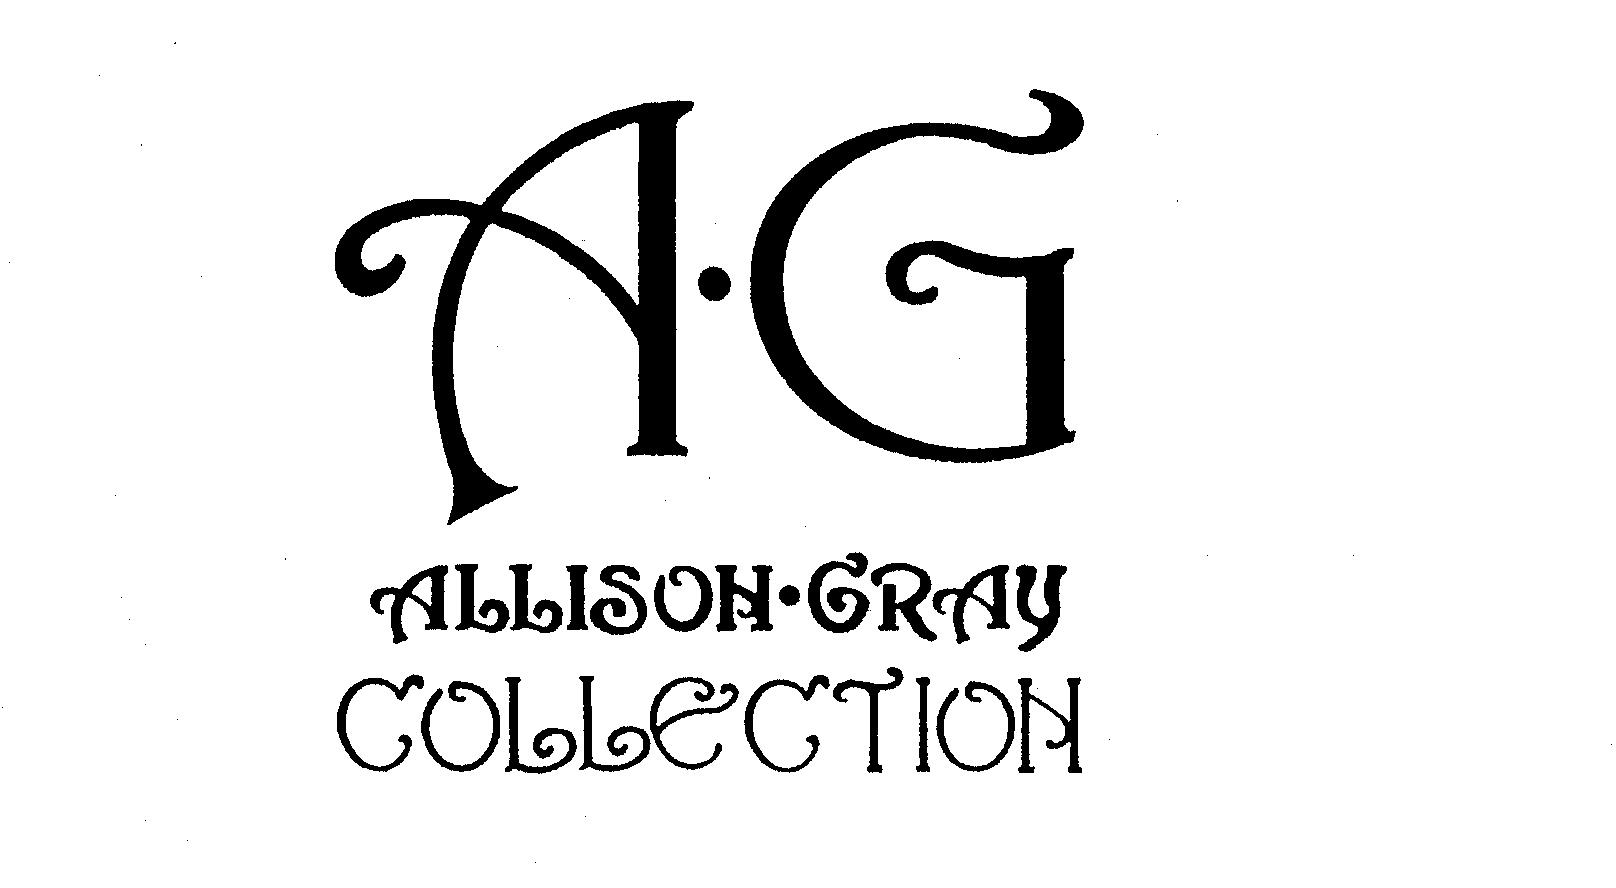  A-G ALLISON-GRAY COLLECTION